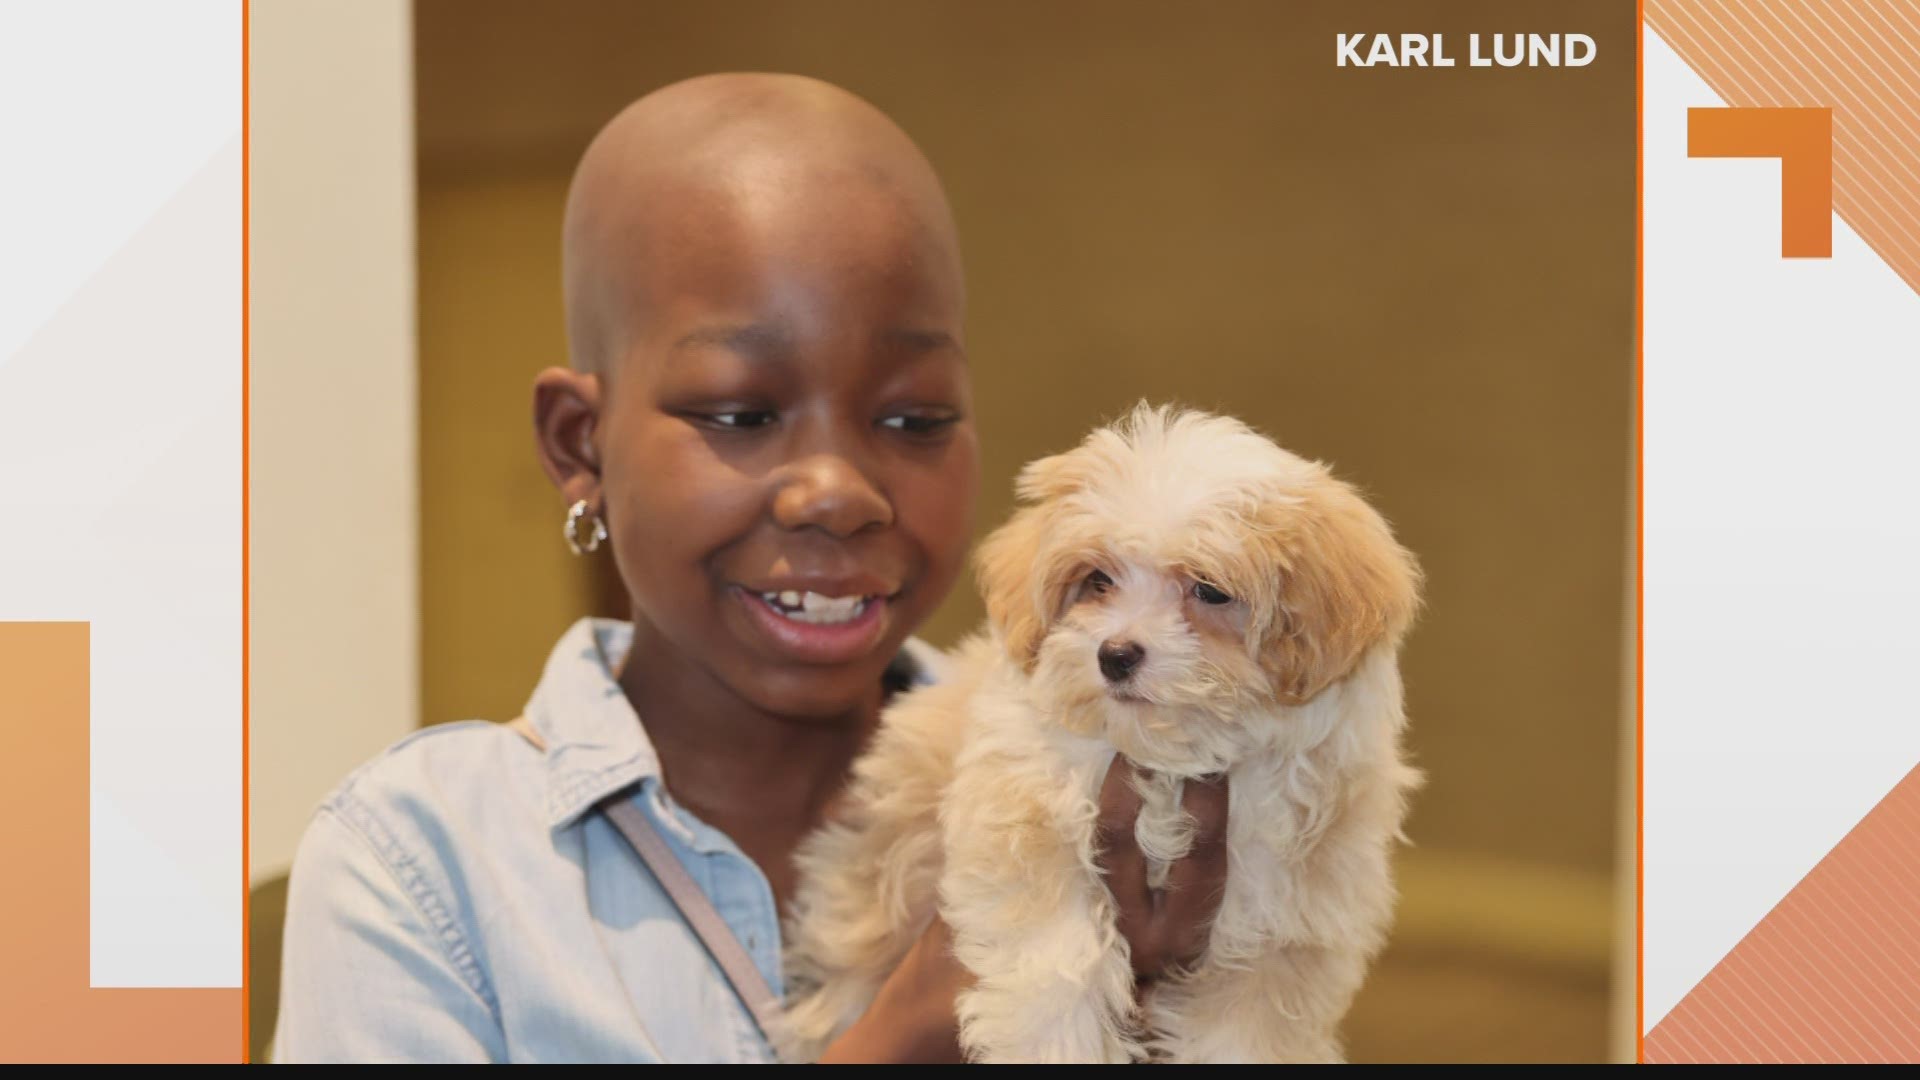 Iliana is 13 years old and out of treatment options. Her new puppy may be fewer than 3 pounds, but he's giving her the will and strength to continue the fight.